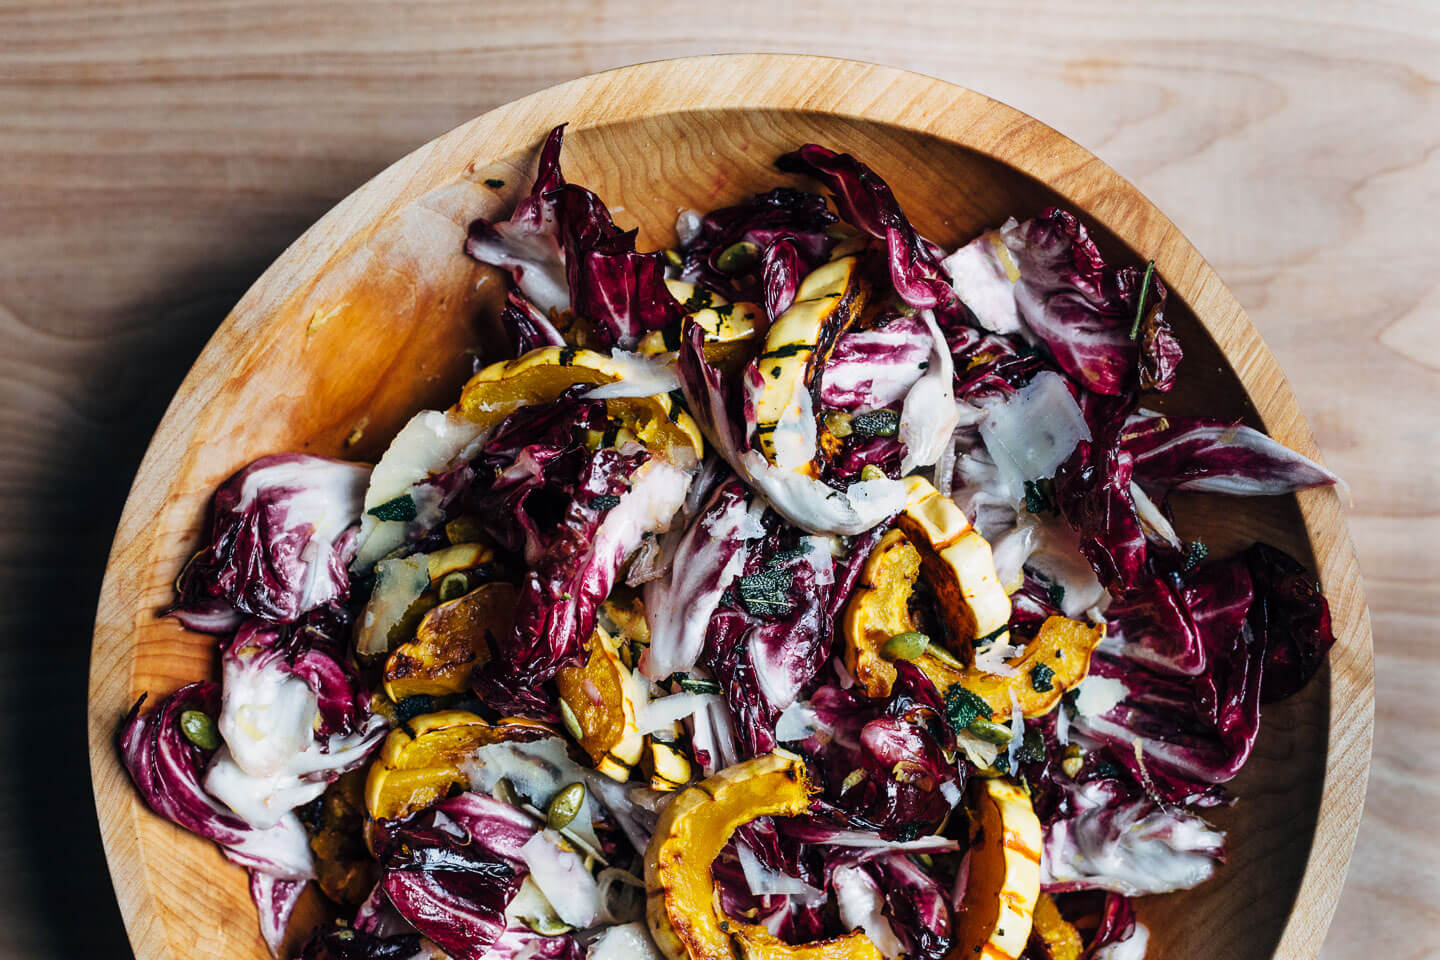 An autumnal radicchio and roasted delicata squash salad tossed in a lemon maple dressing, and topped with salty pepitas, fried sage leaves, and Parmesan.